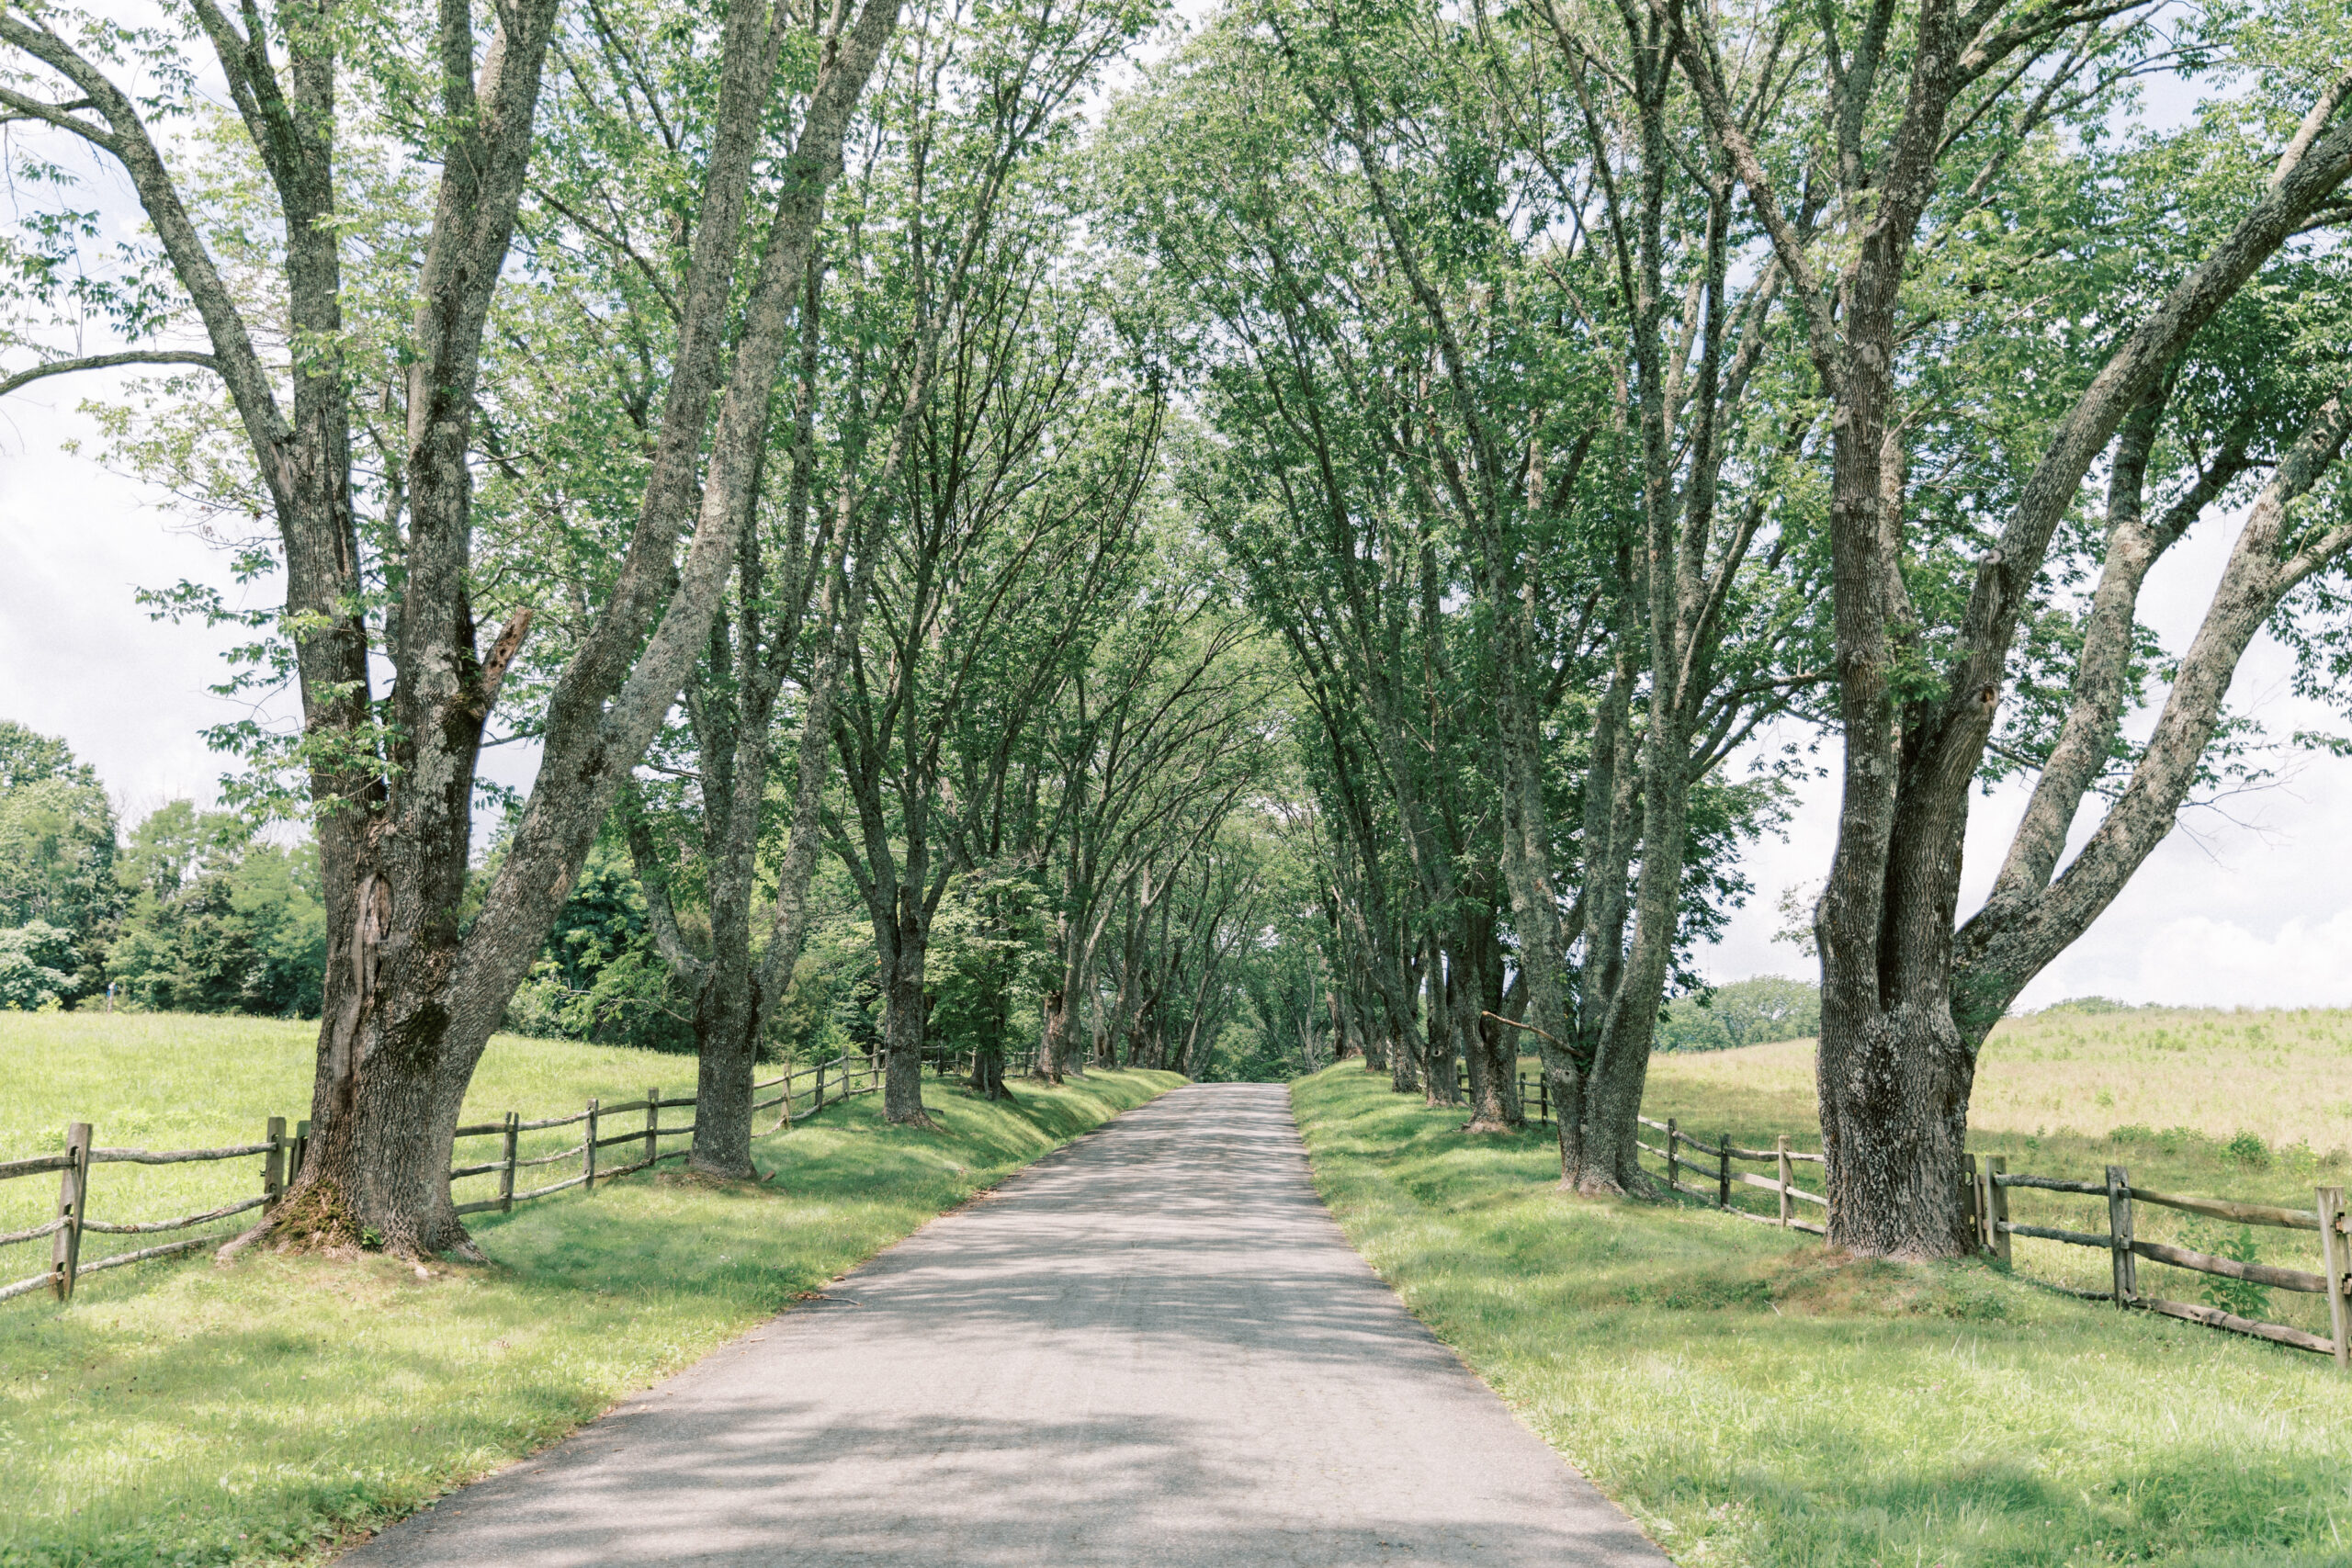 james monroe highland wedding road that is lined with trees